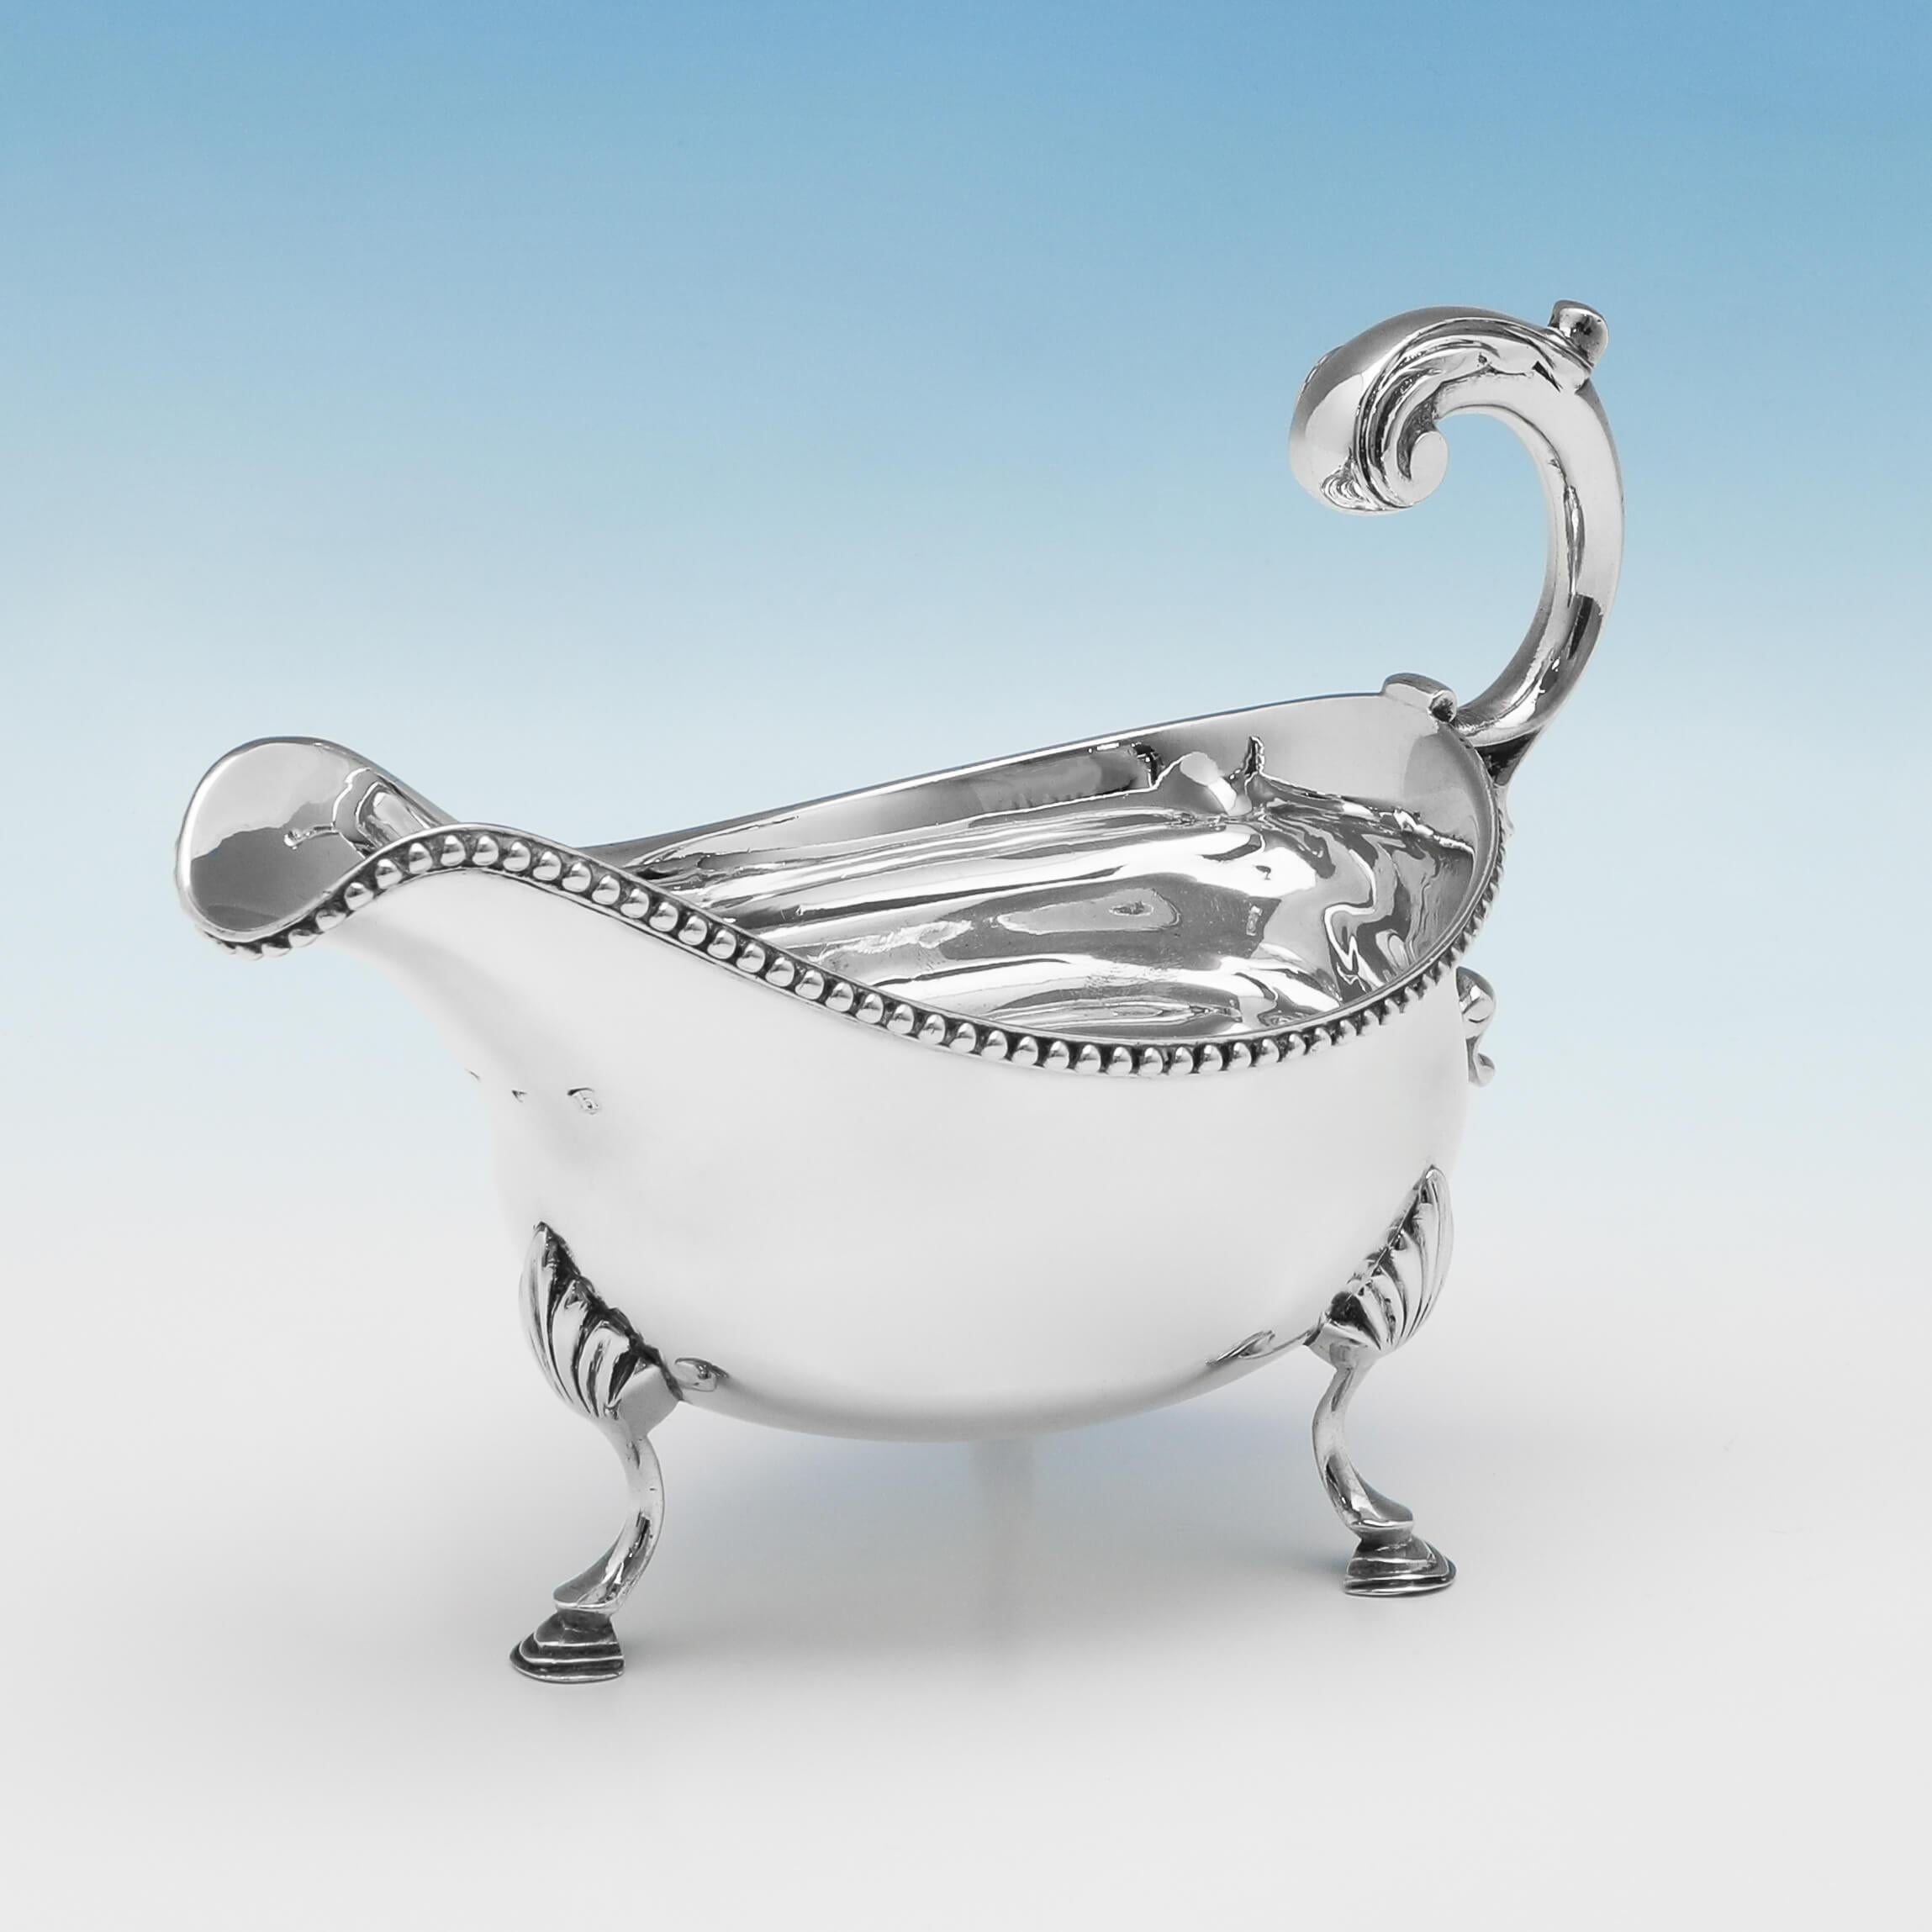 Hallmarked in London in 1783, this George III, antique sterling silver sauce boat, features a bead border, an acanthus detailed handle, and stands on three hoof feet. The sauce boat measures 4.75